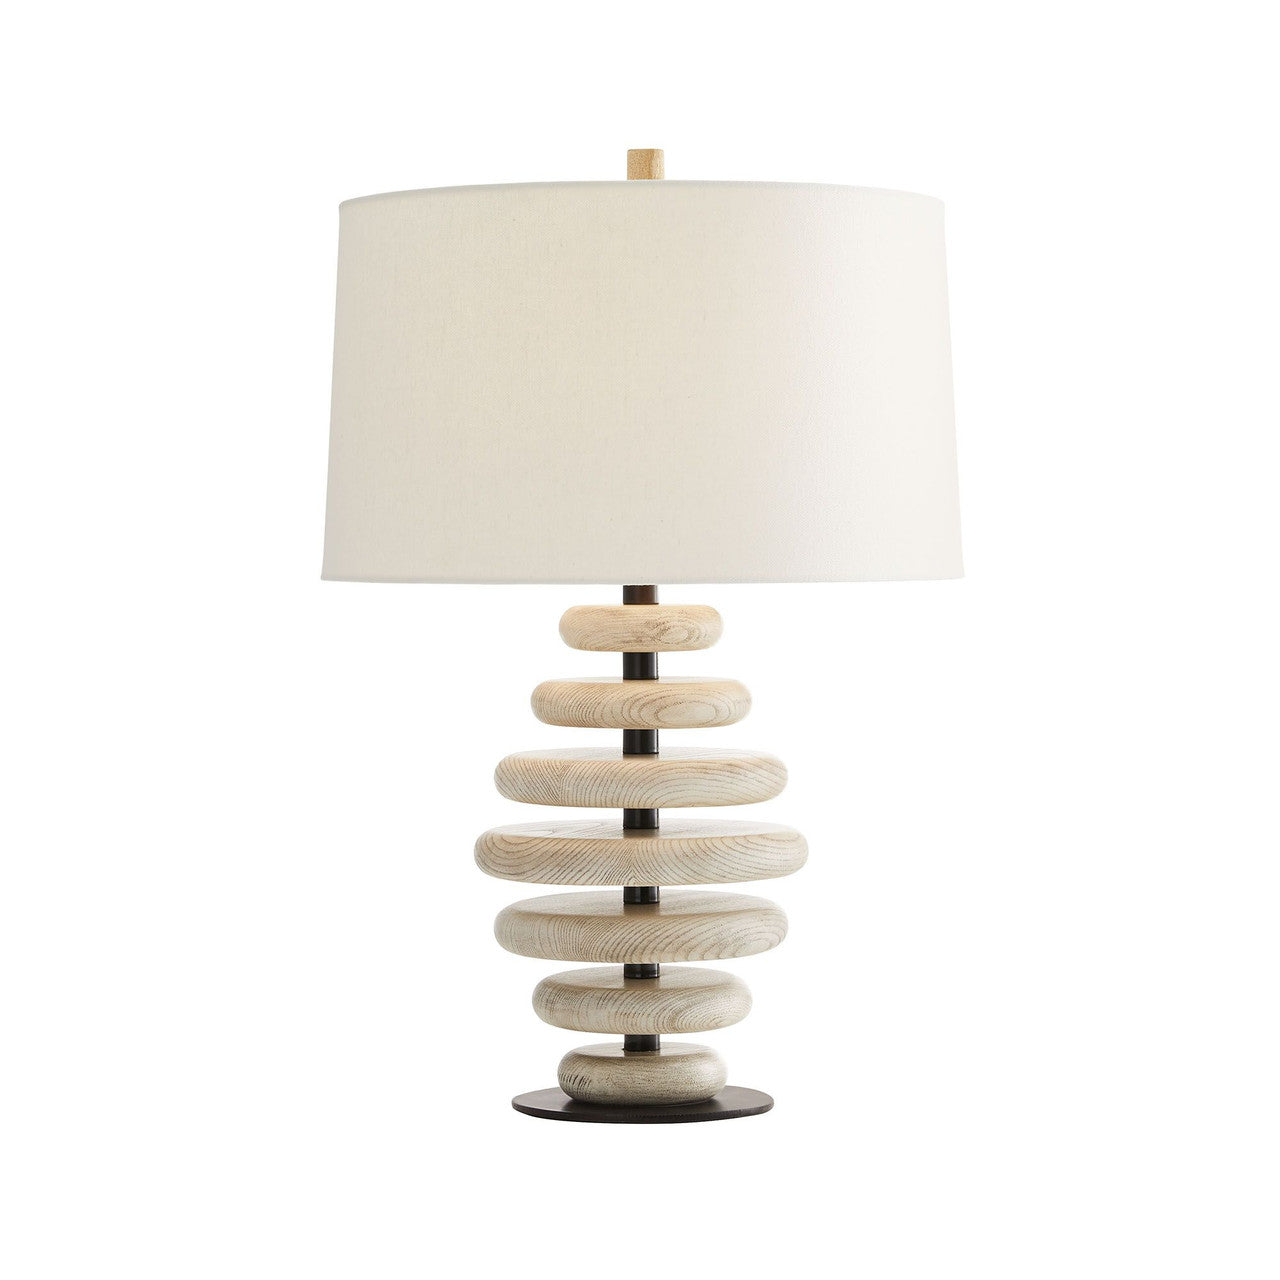 TABLE LAMP CERUSED OAK DISCS WITH IRON SPINE